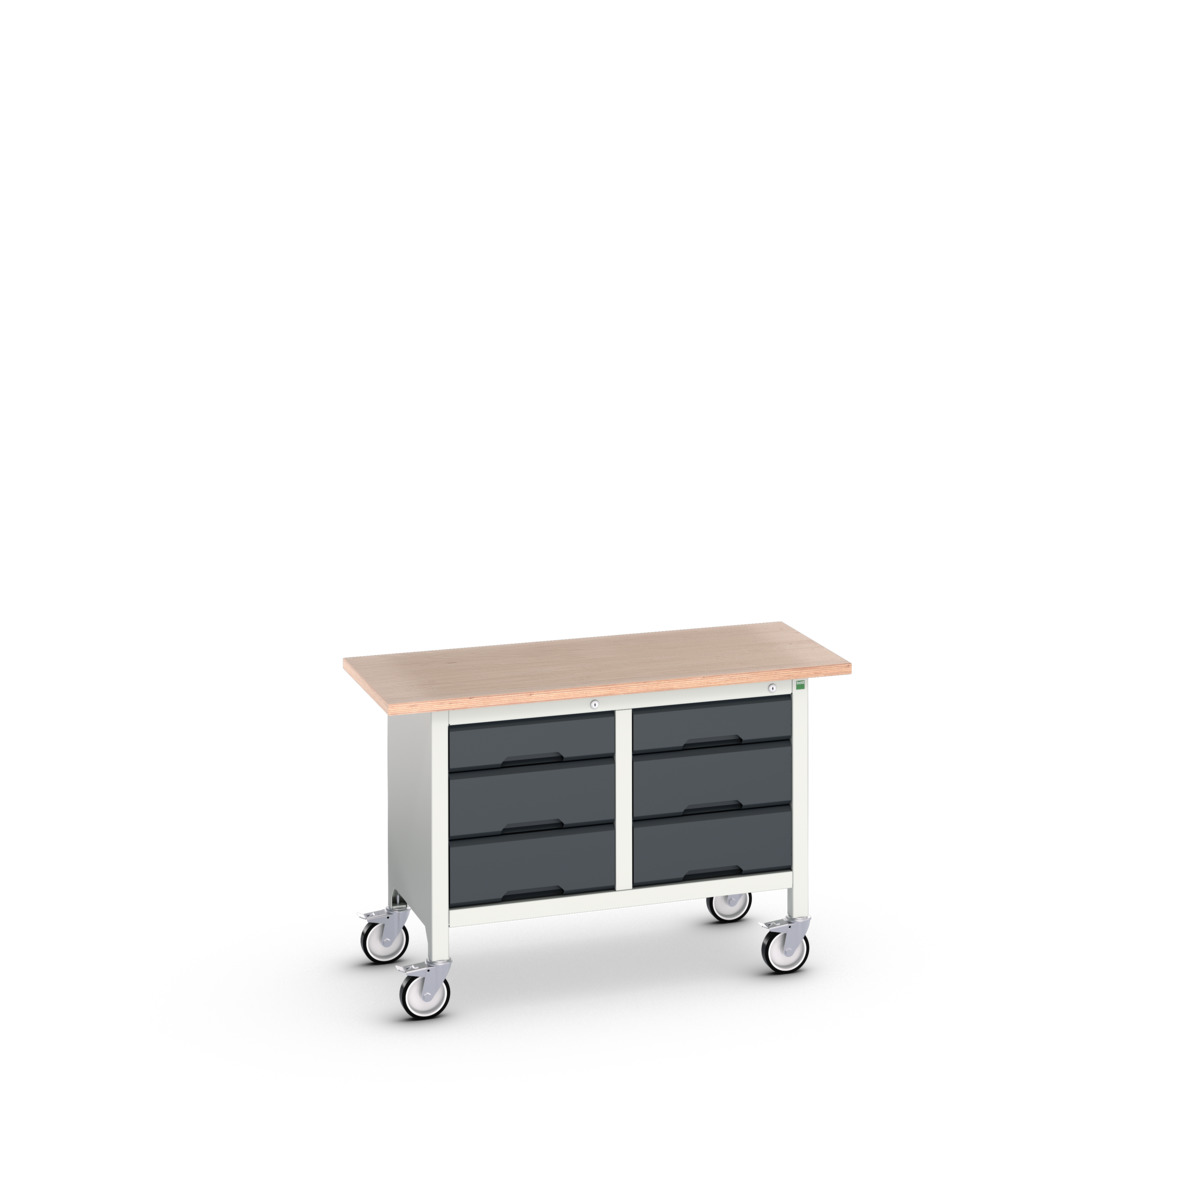 16923204. - verso mobile storage bench (mpx)